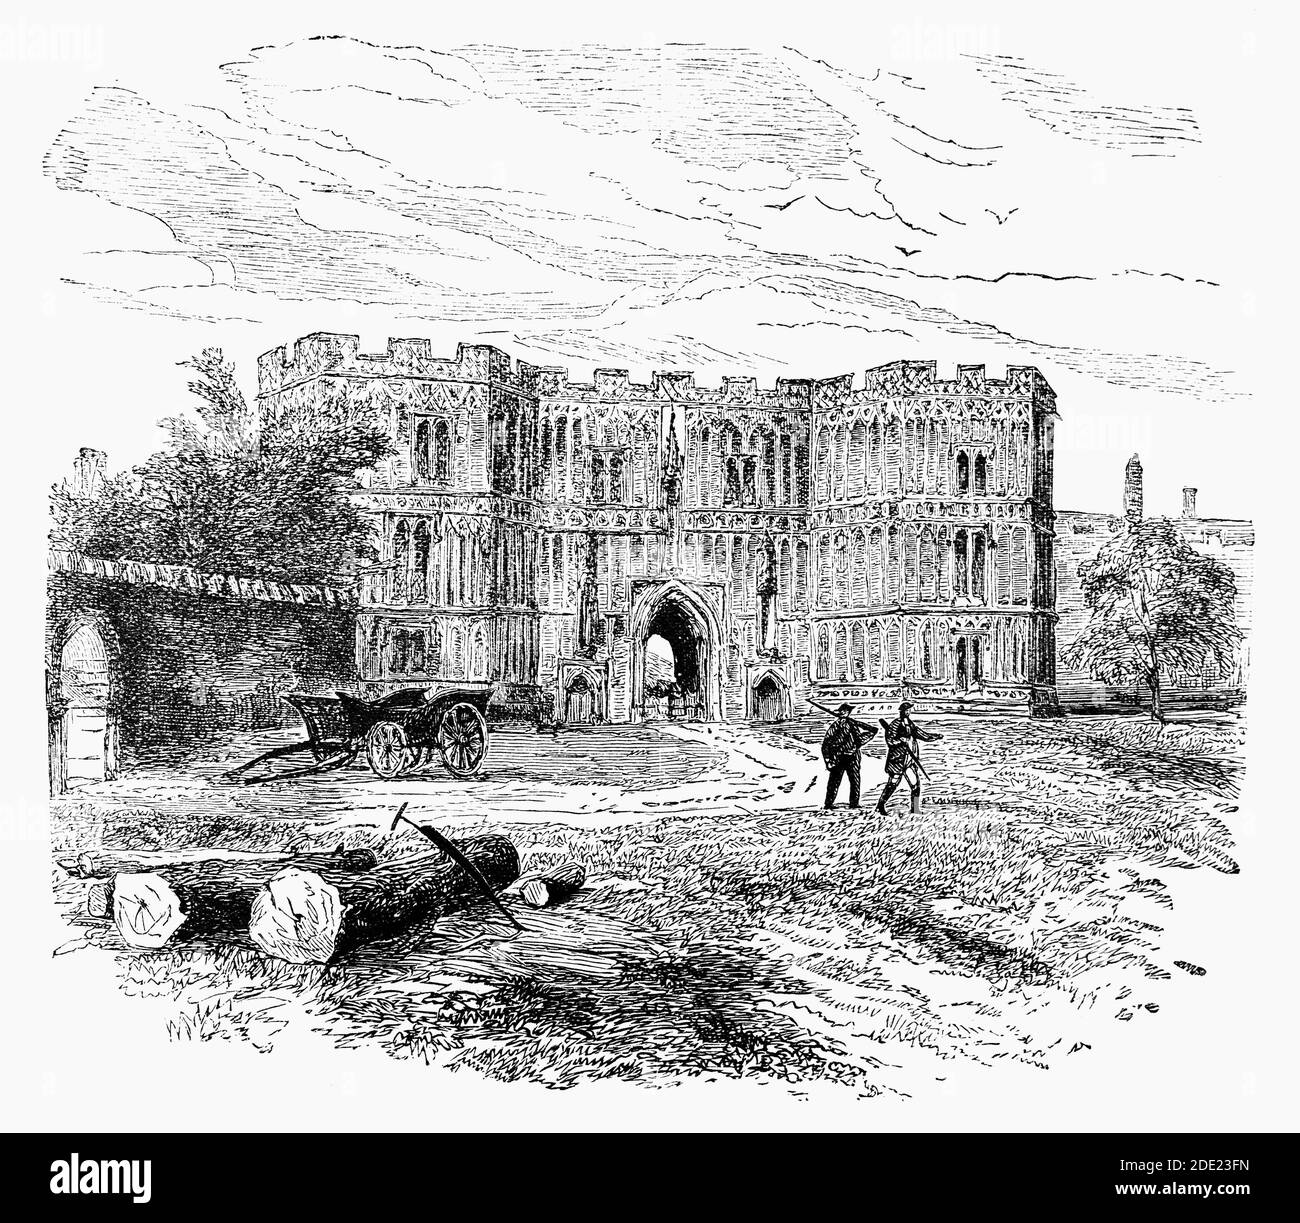 A 19th Century view of the gatehouse of St Osyth's Abbey (aka St Osyth's Priory), dating from the late 15th century, a fine example of decorative flint work, it is the most significant remnant of the original monastic structures still standing. A house of Augustinian canons in Essex, England it was founded by Richard de Belmeis, Bishop of London, c. 1121. The first prior of St Osyth's was William de Corbeil, who was elected archbishop of Canterbury in 1123 and who crowned King Stephen in 1135. Stock Photo